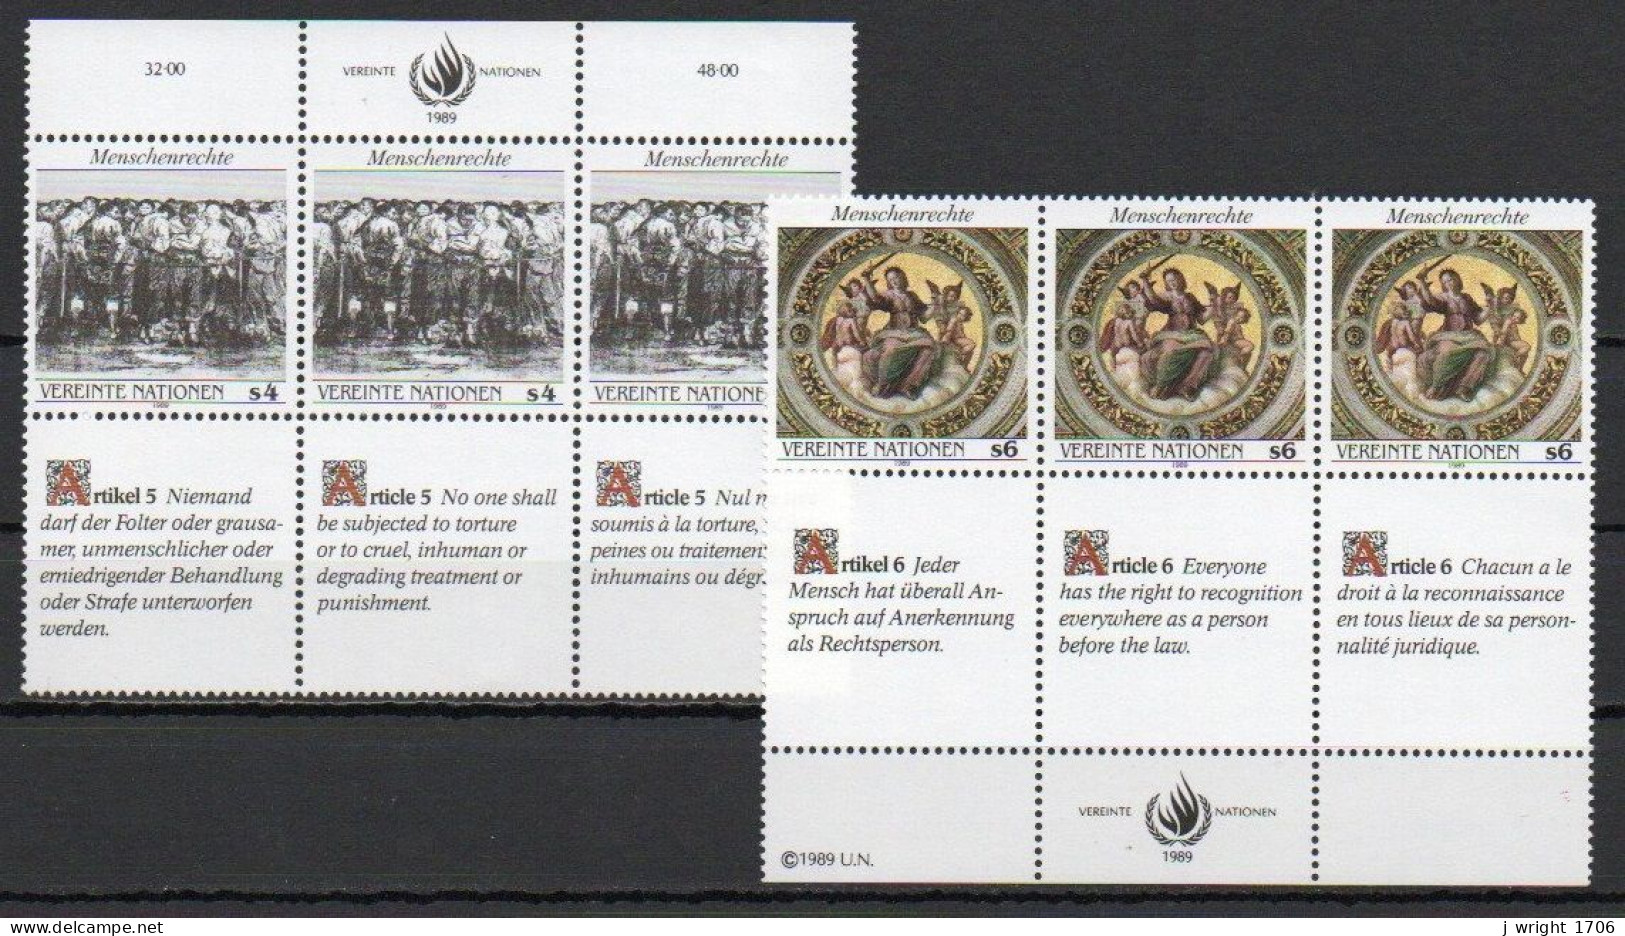 UN/Vienna, 1989, Human Rights, Set/Article 5 & 6 X 3 Languages Joined Pair, MNH - Unused Stamps